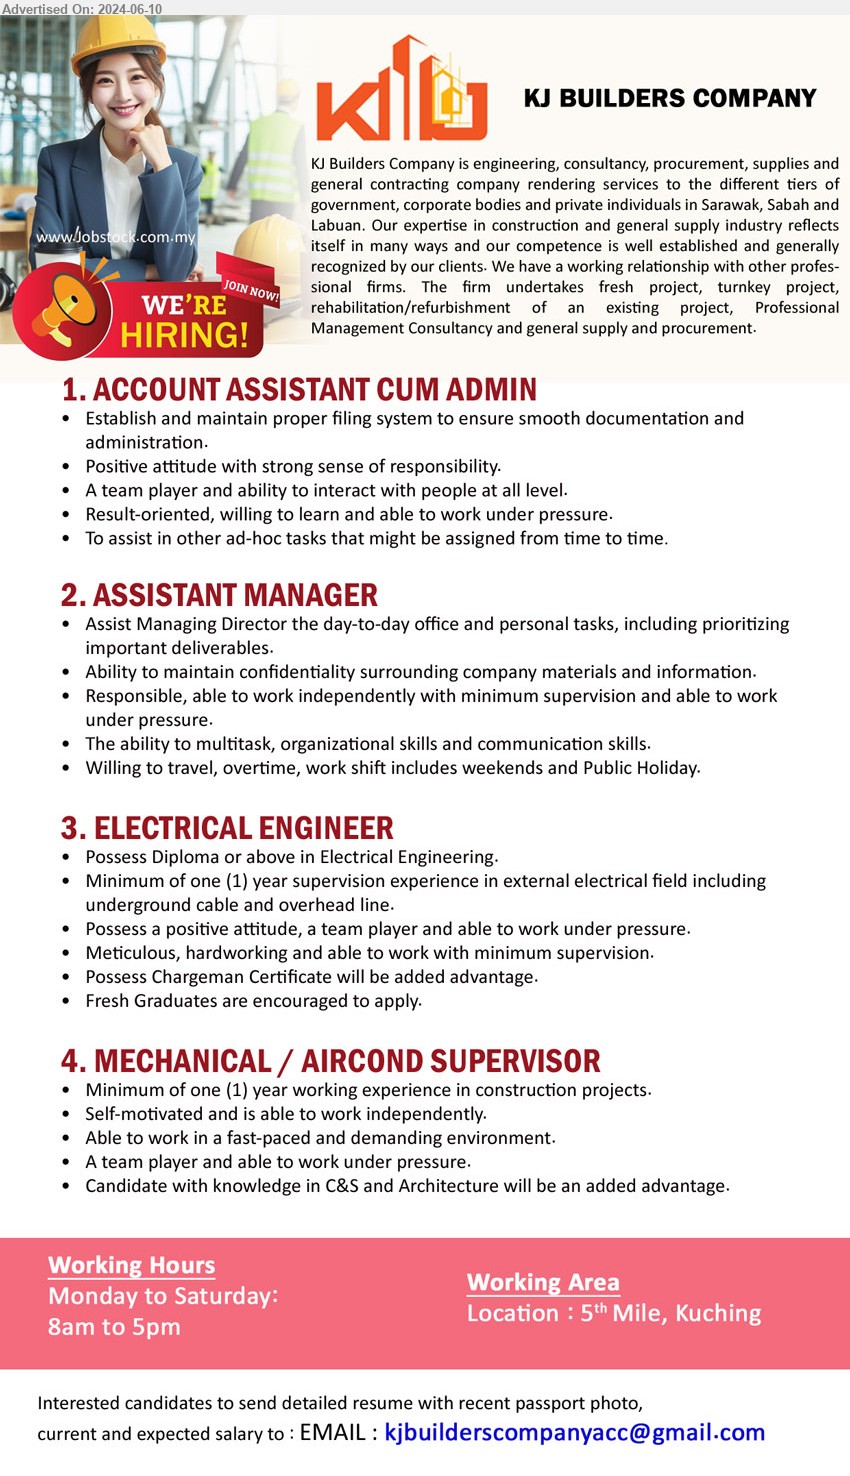 KJ BUILDERS COMPANY - 1. ACCOUNT ASSISTANT CUM ADMIN (Kuching), Establish and maintain proper filing system to ensure smooth documentation and   
administration,...
2. ASSISTANT MANAGER (Kuching), Assist Managing Director the day-to-day office and personal tasks, including prioritizing 
important deliverables,...
3. ELECTRICAL ENGINEER (Kuching), Diploma or above in Electrical Engineering., 1 yr. exp.,...
4. MECHANICAL / AIRCOND SUPERVISOR (Kuching), Minimum of one (1) year working experience in construction projects, Self-motivated and is able to work independently,...
Email resume to ...